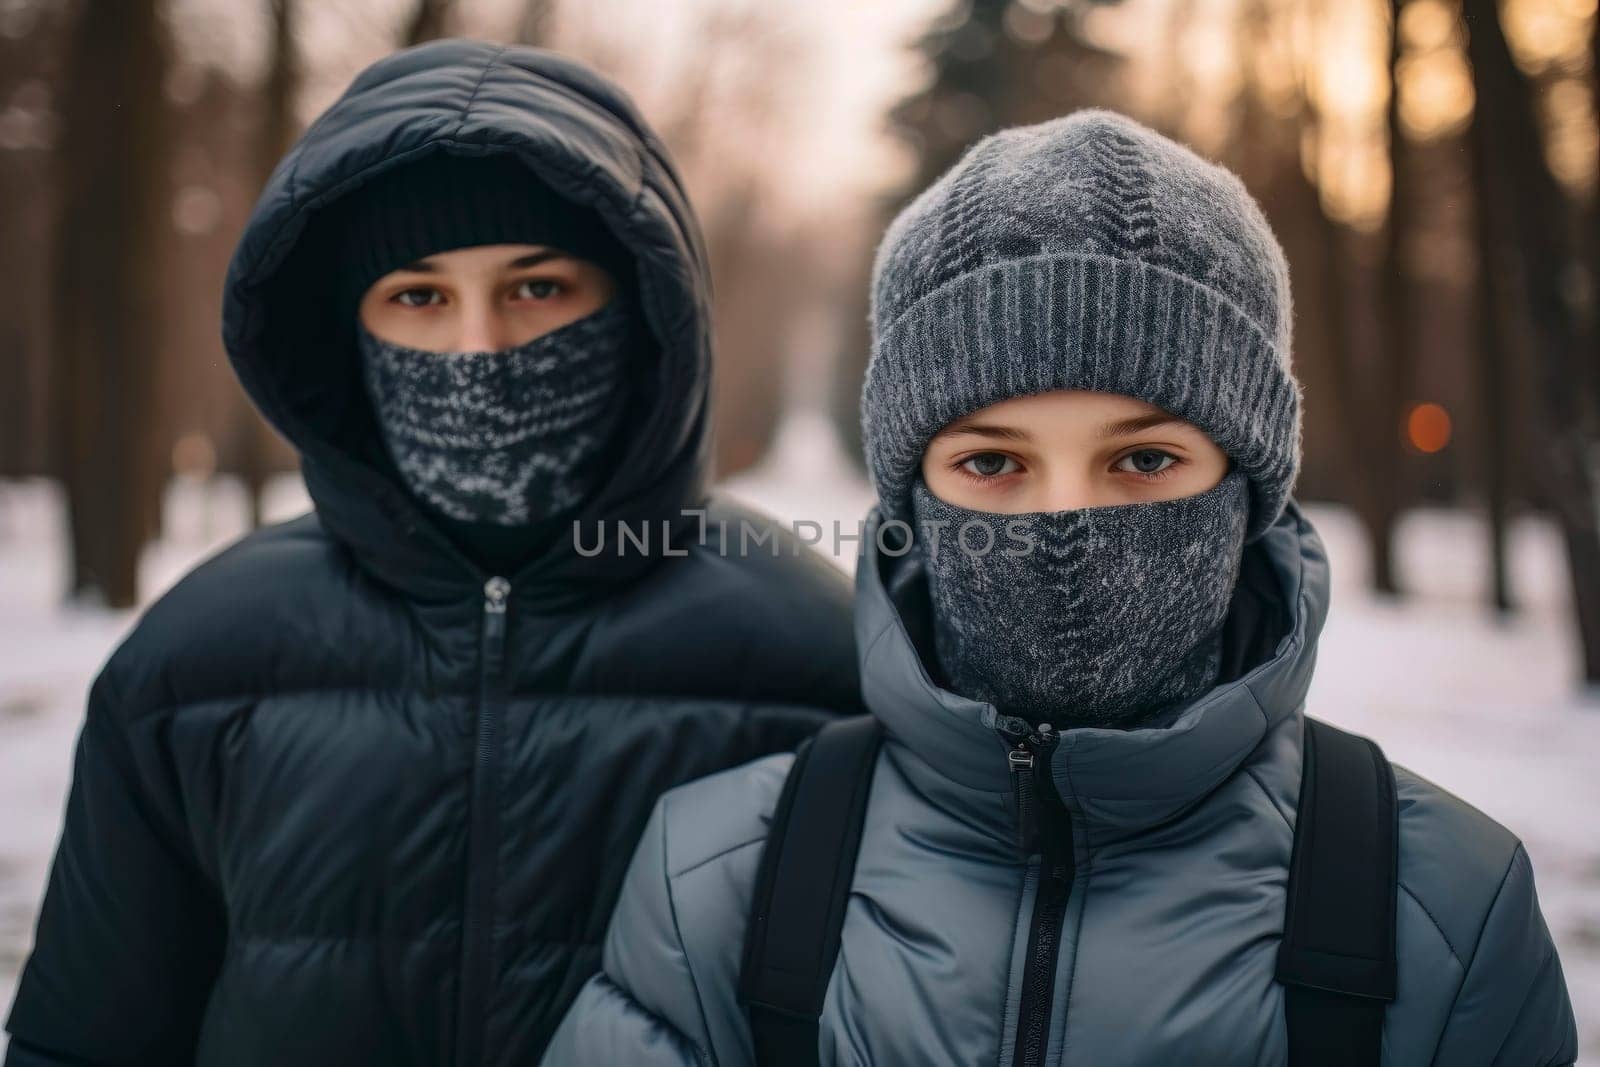 Winter Travelers: Couple Exploring Cold with Scarves by pippocarlot